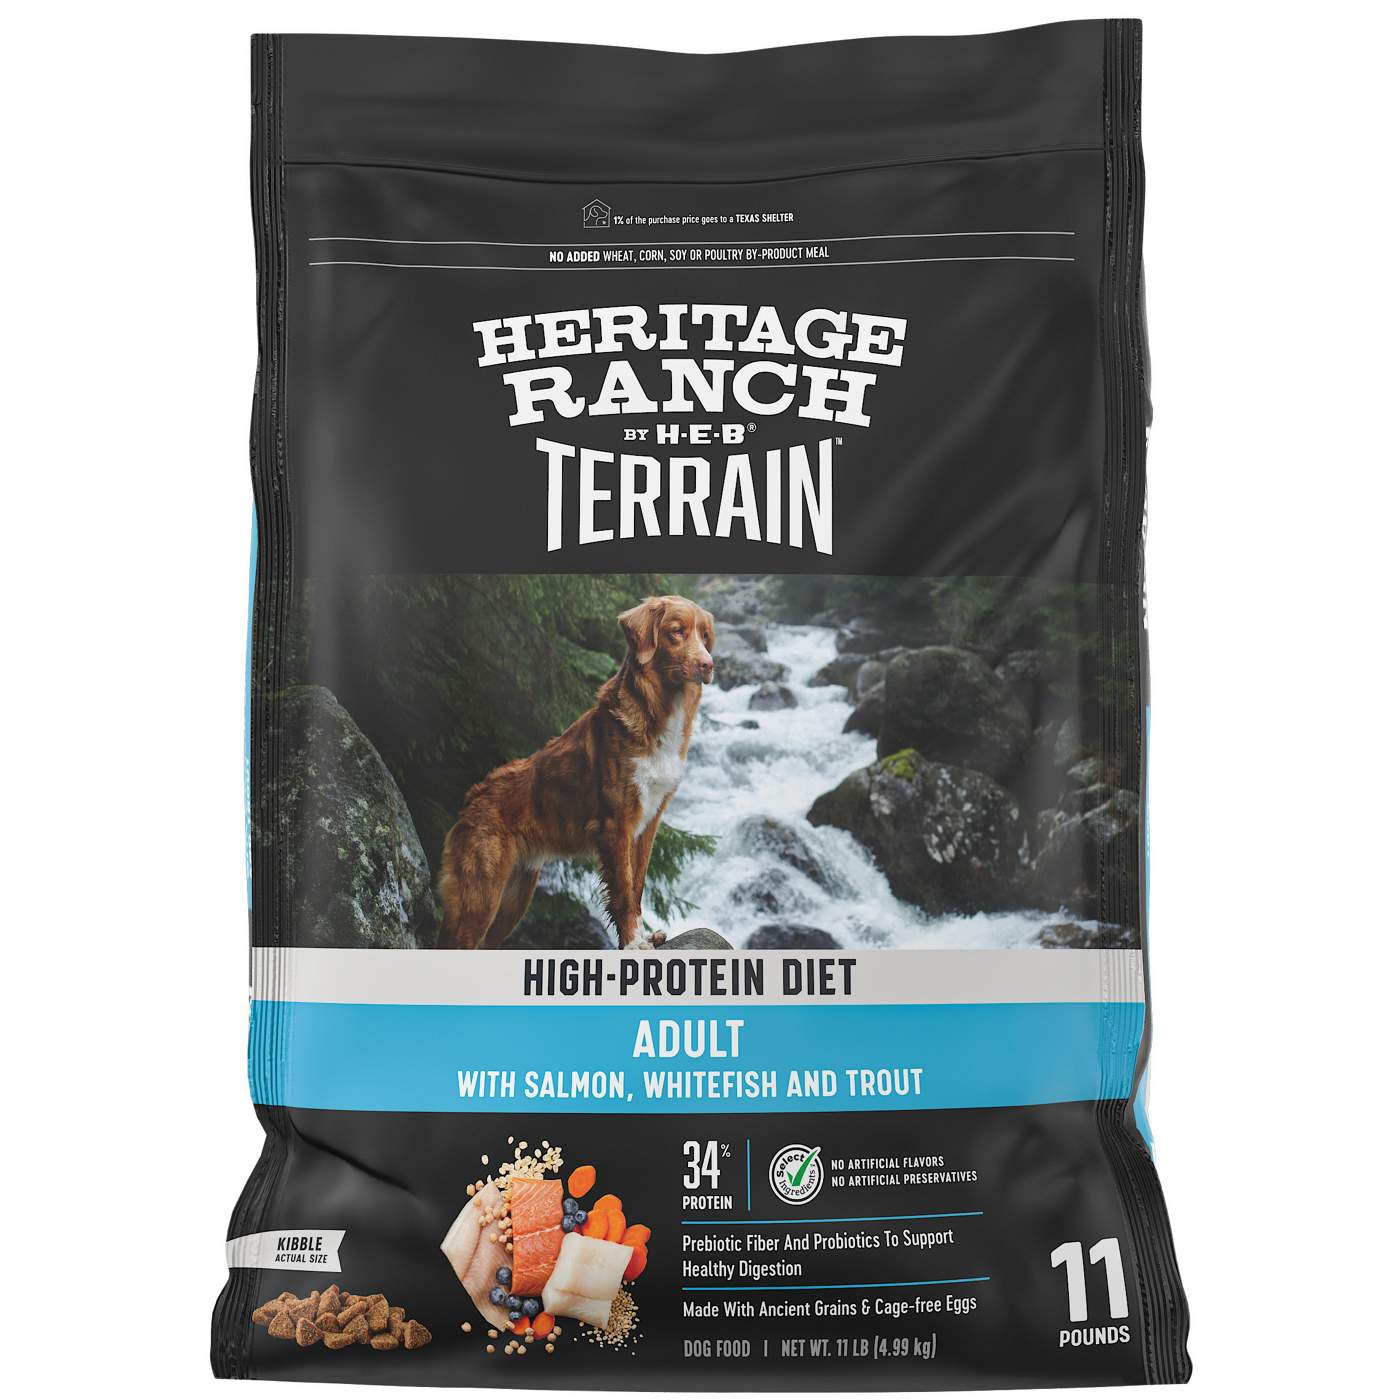 Heritage Ranch by H-E-B Terrain High Protein Diet Adult Dry Dog Food - Salmon, Whitefish & Trout; image 1 of 2